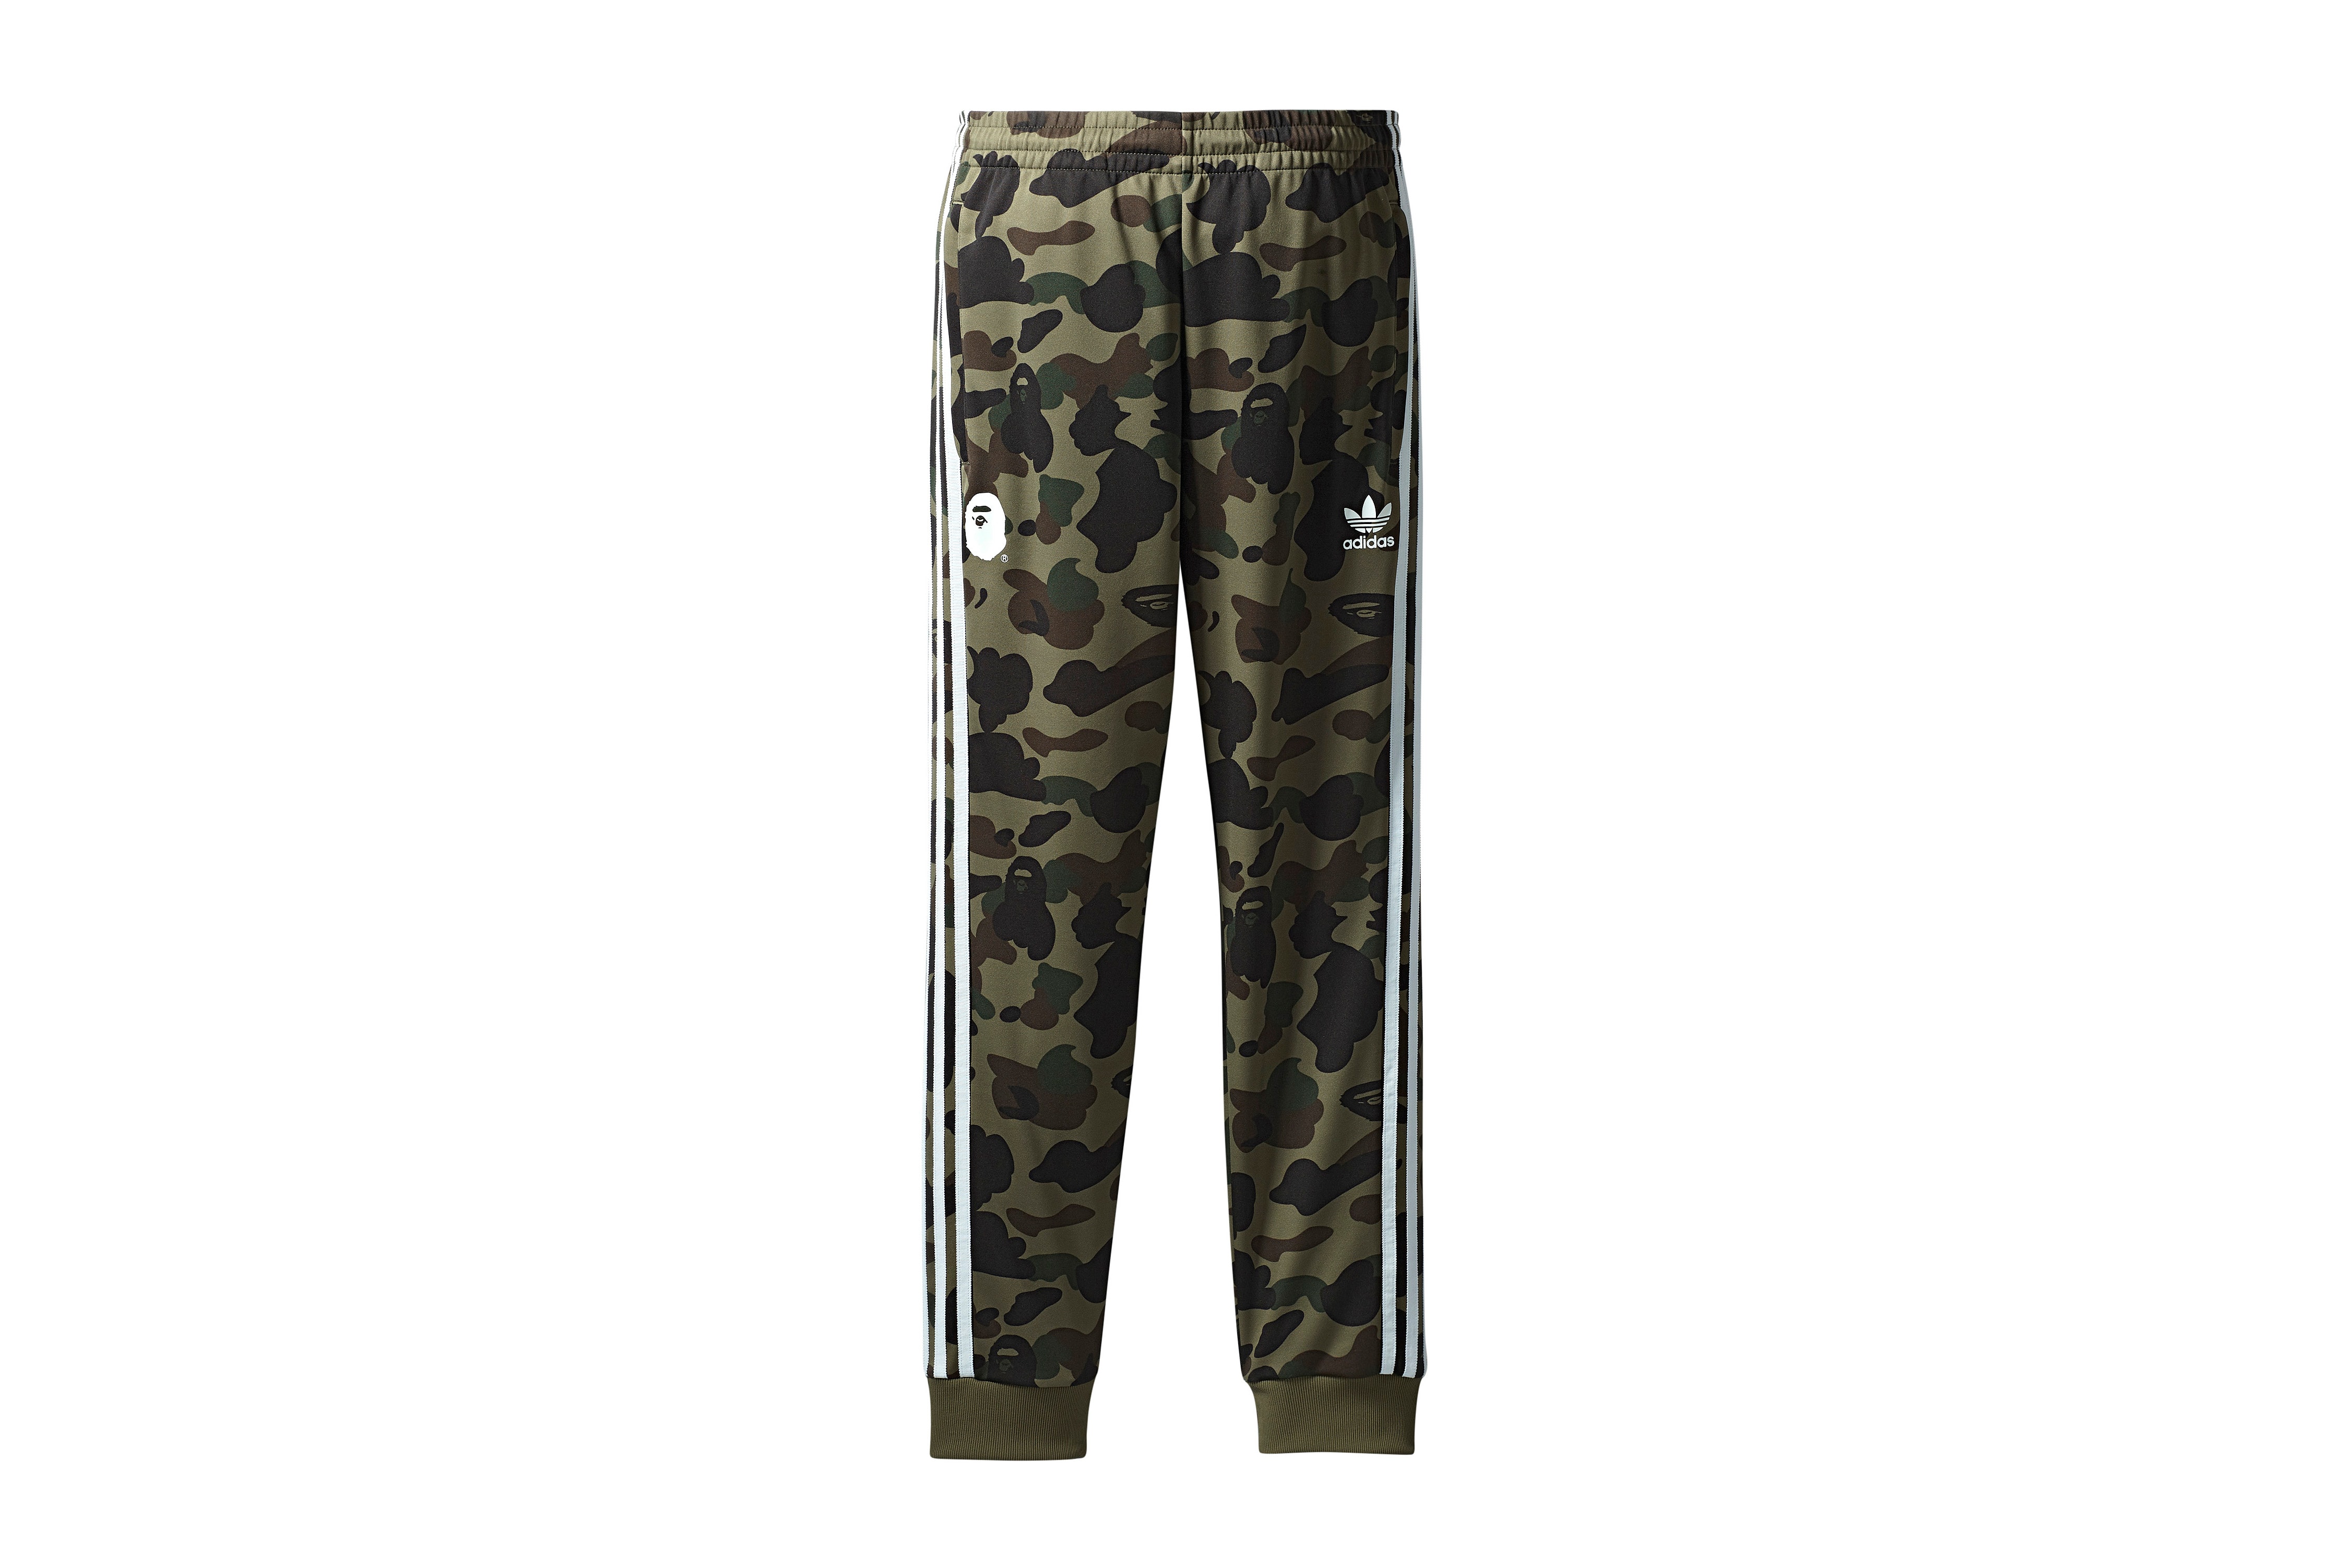 BAPE adidas Originals 2018 Apparel Collection Collaboration Collab adicolor Release Details Camouflage Release Information Details First Look Closer